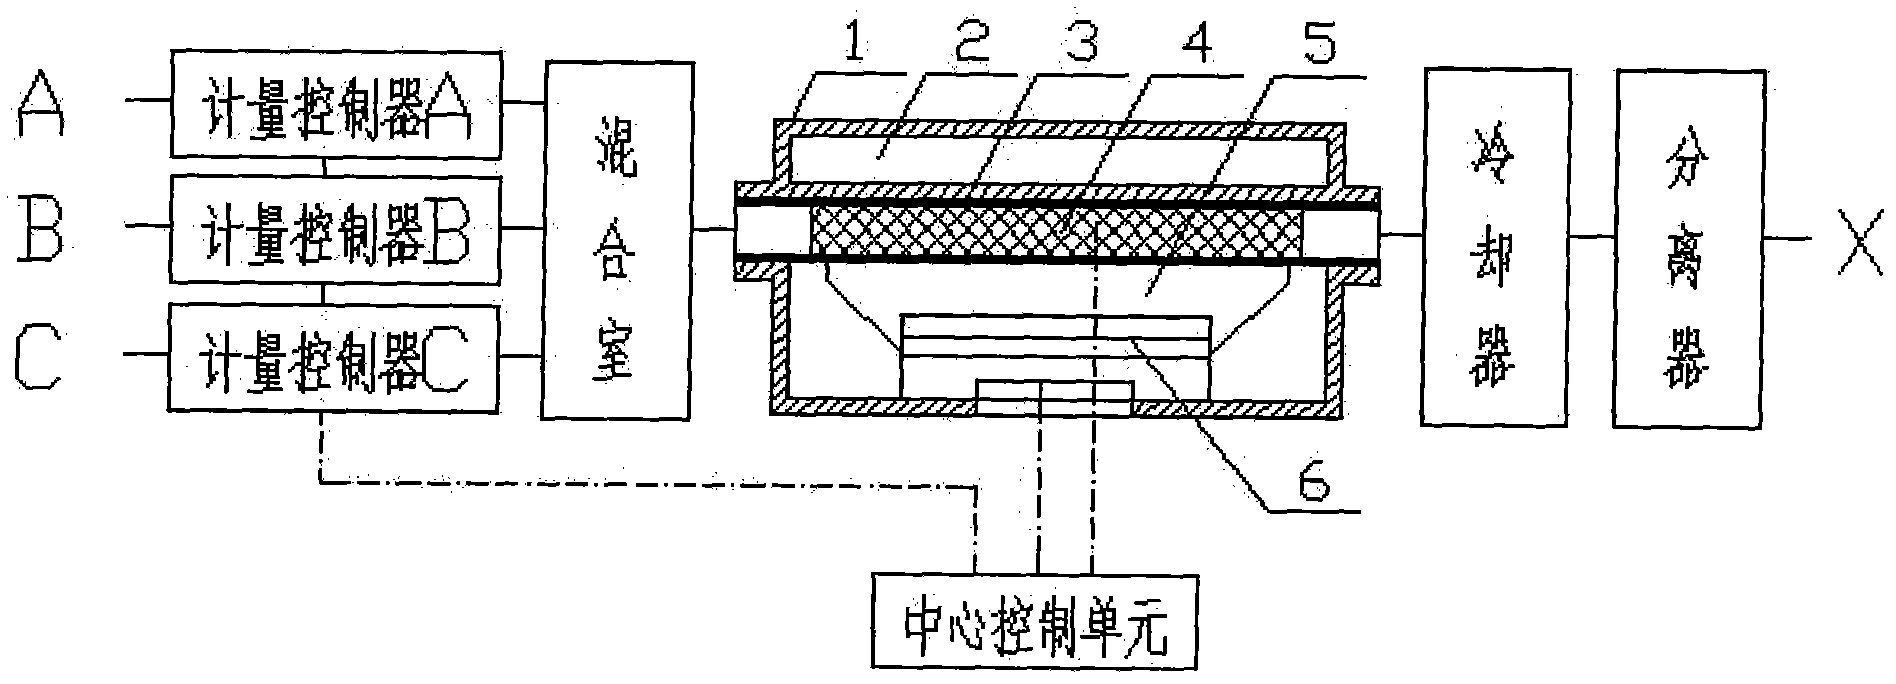 Microwave catalytic reactor system